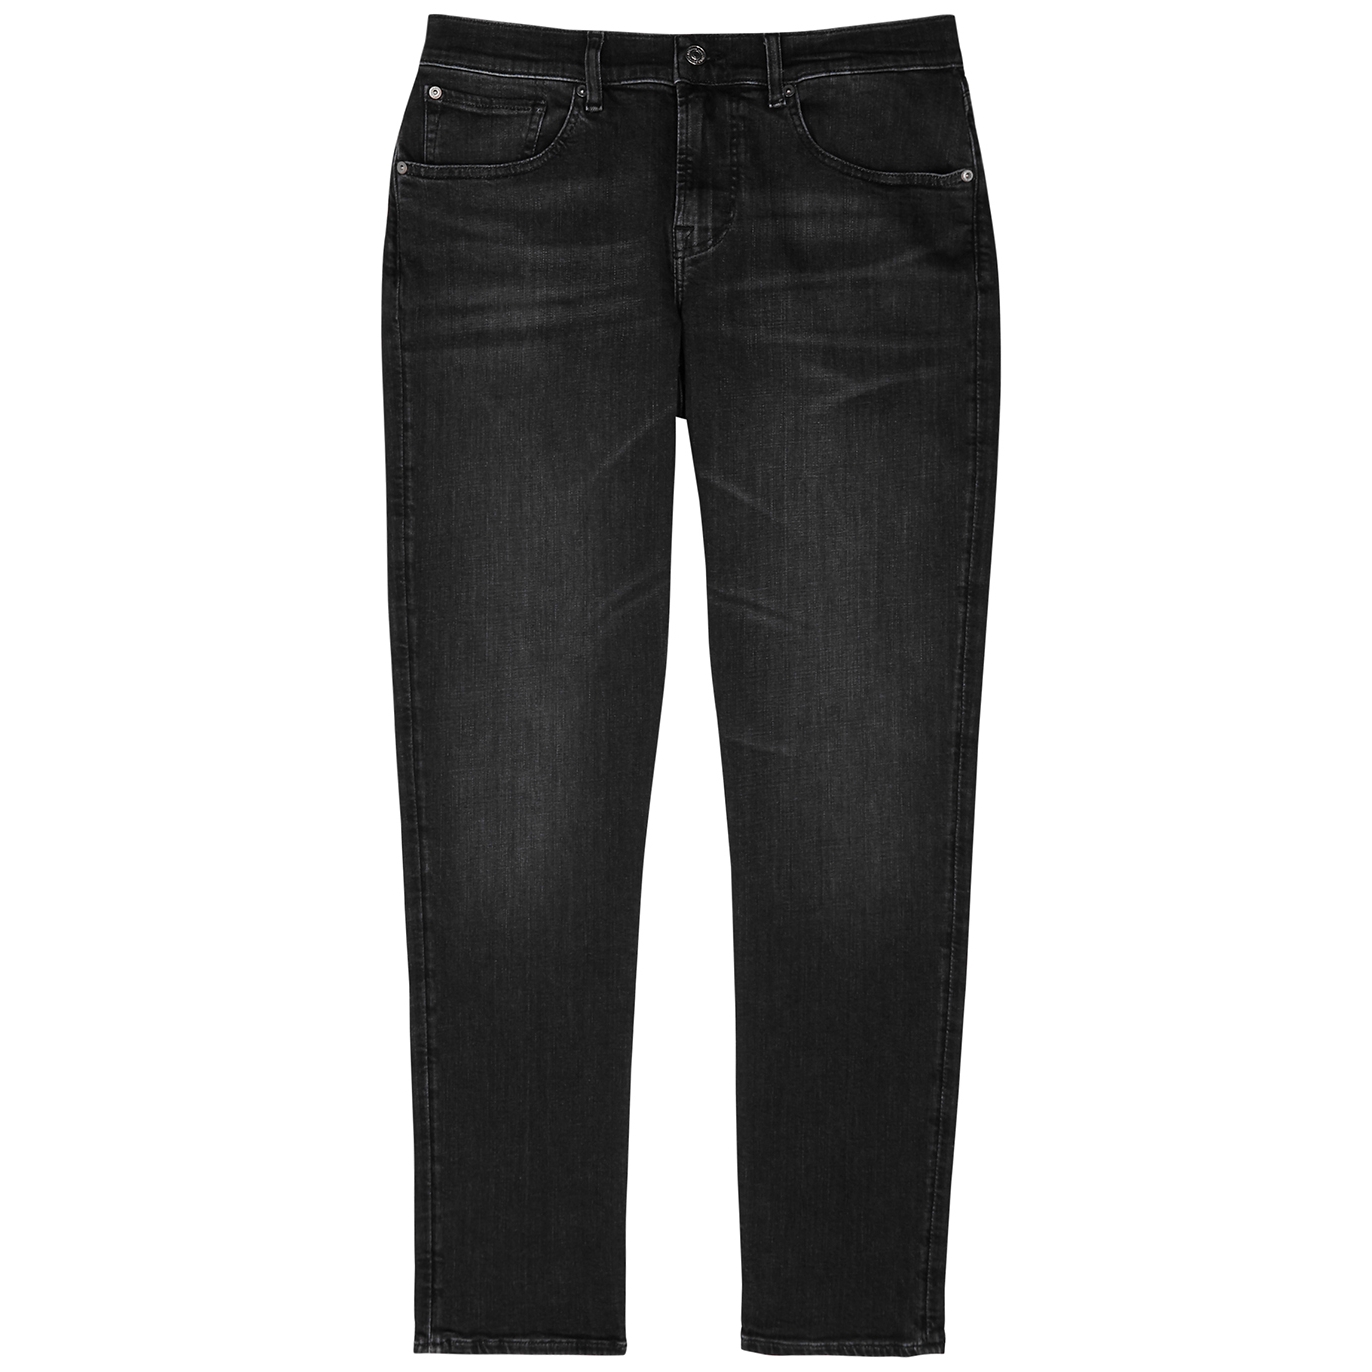 7 For All Mankind Slimmy Tapered Earthkind Jeans - Black - W38